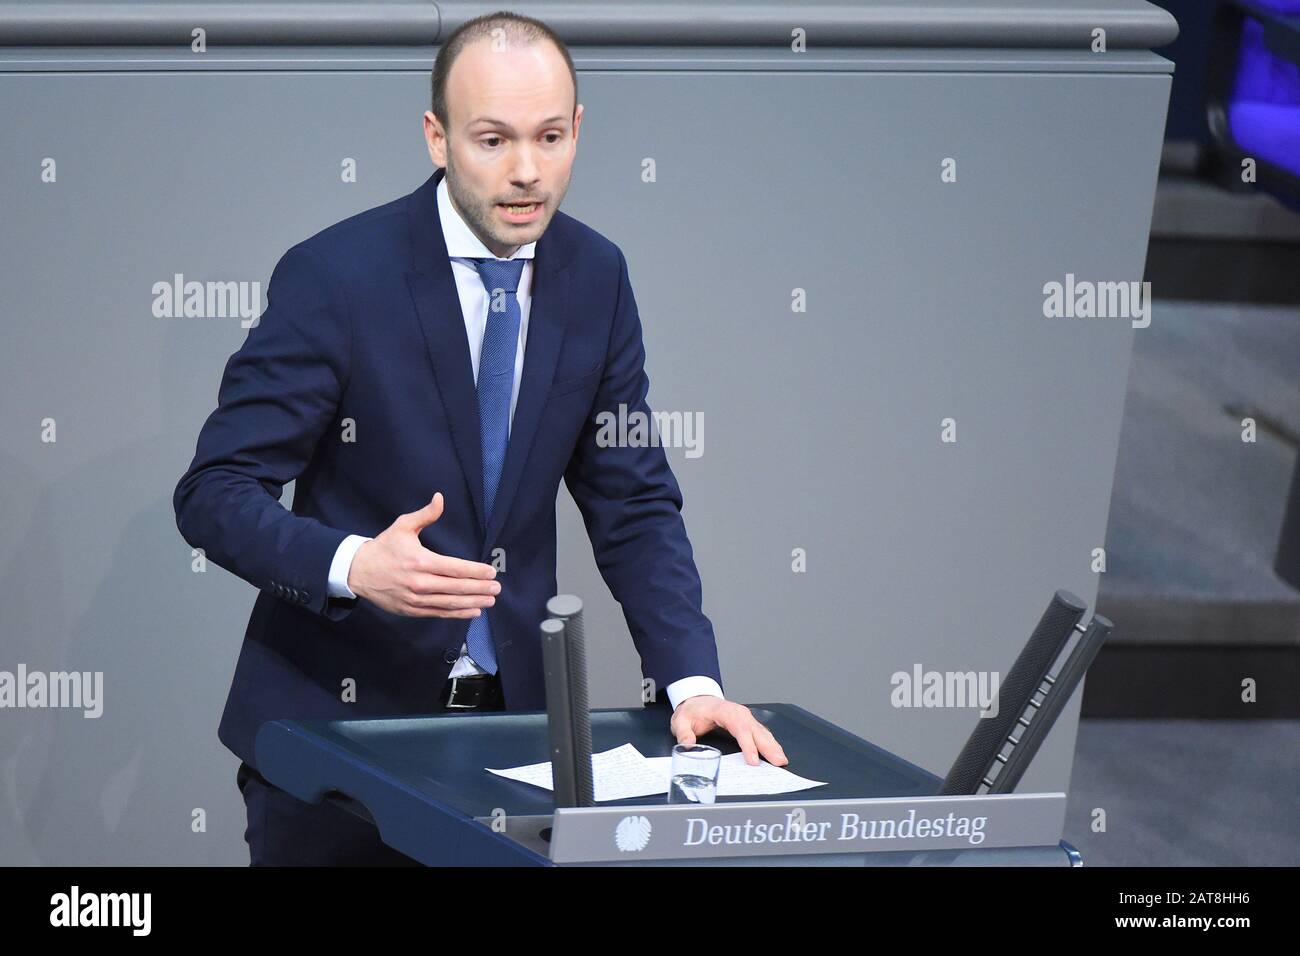 Berlin, Germany. 31st Jan, 2020. Nicolas Löbel (CDU) speaks during a session of the German Bundestag in the plenary hall of the Reichstag building. Credit: Sonja Wurtscheid/dpa/Alamy Live News Stock Photo